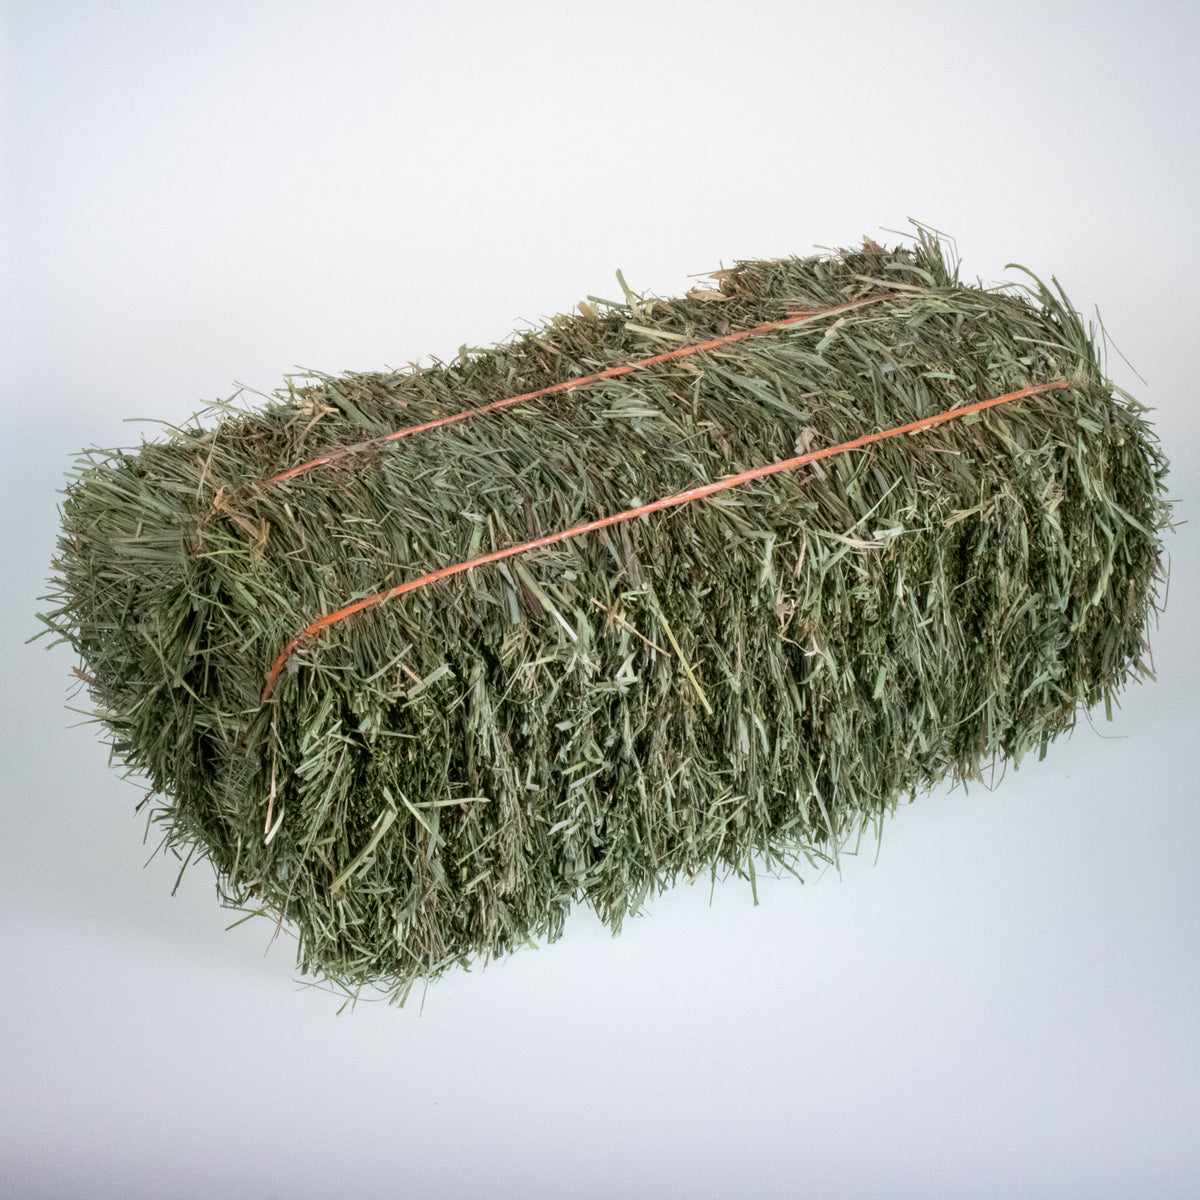 12 Packs: 4 ct. (48 total) Mini Hay Bales by ArtMinds™